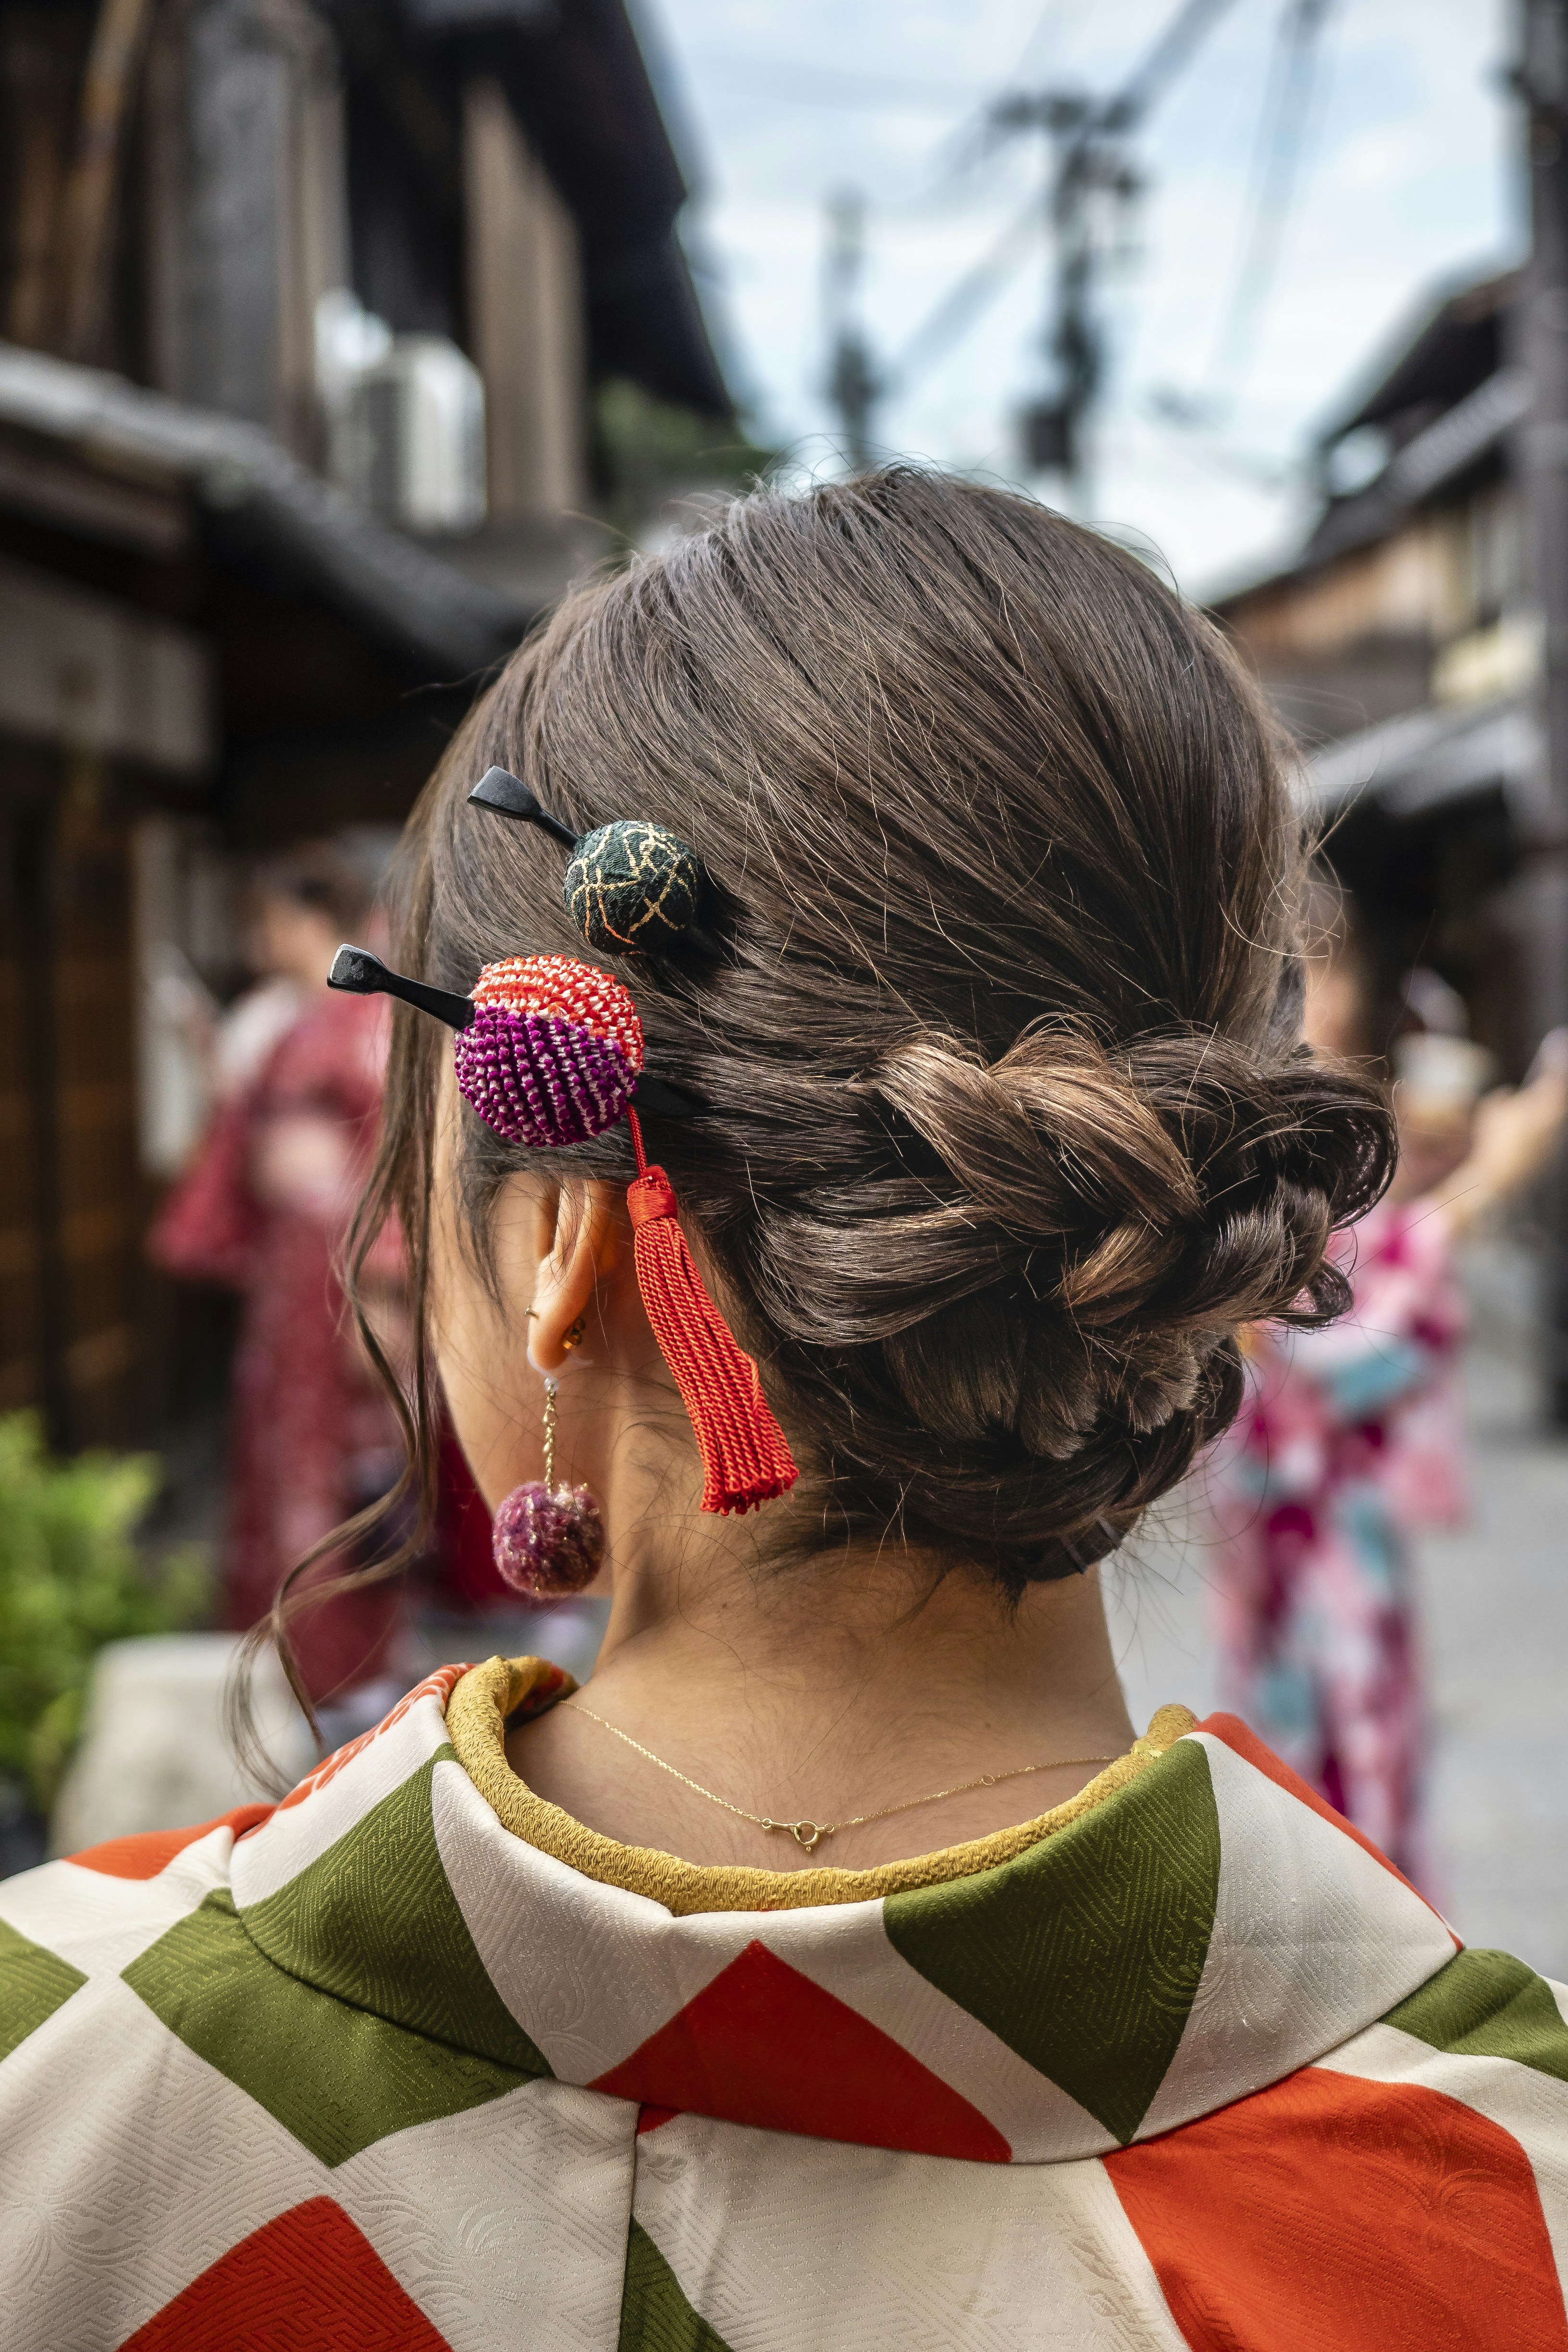 Japanese hairstyle of a young lady, Kyoto - Japan